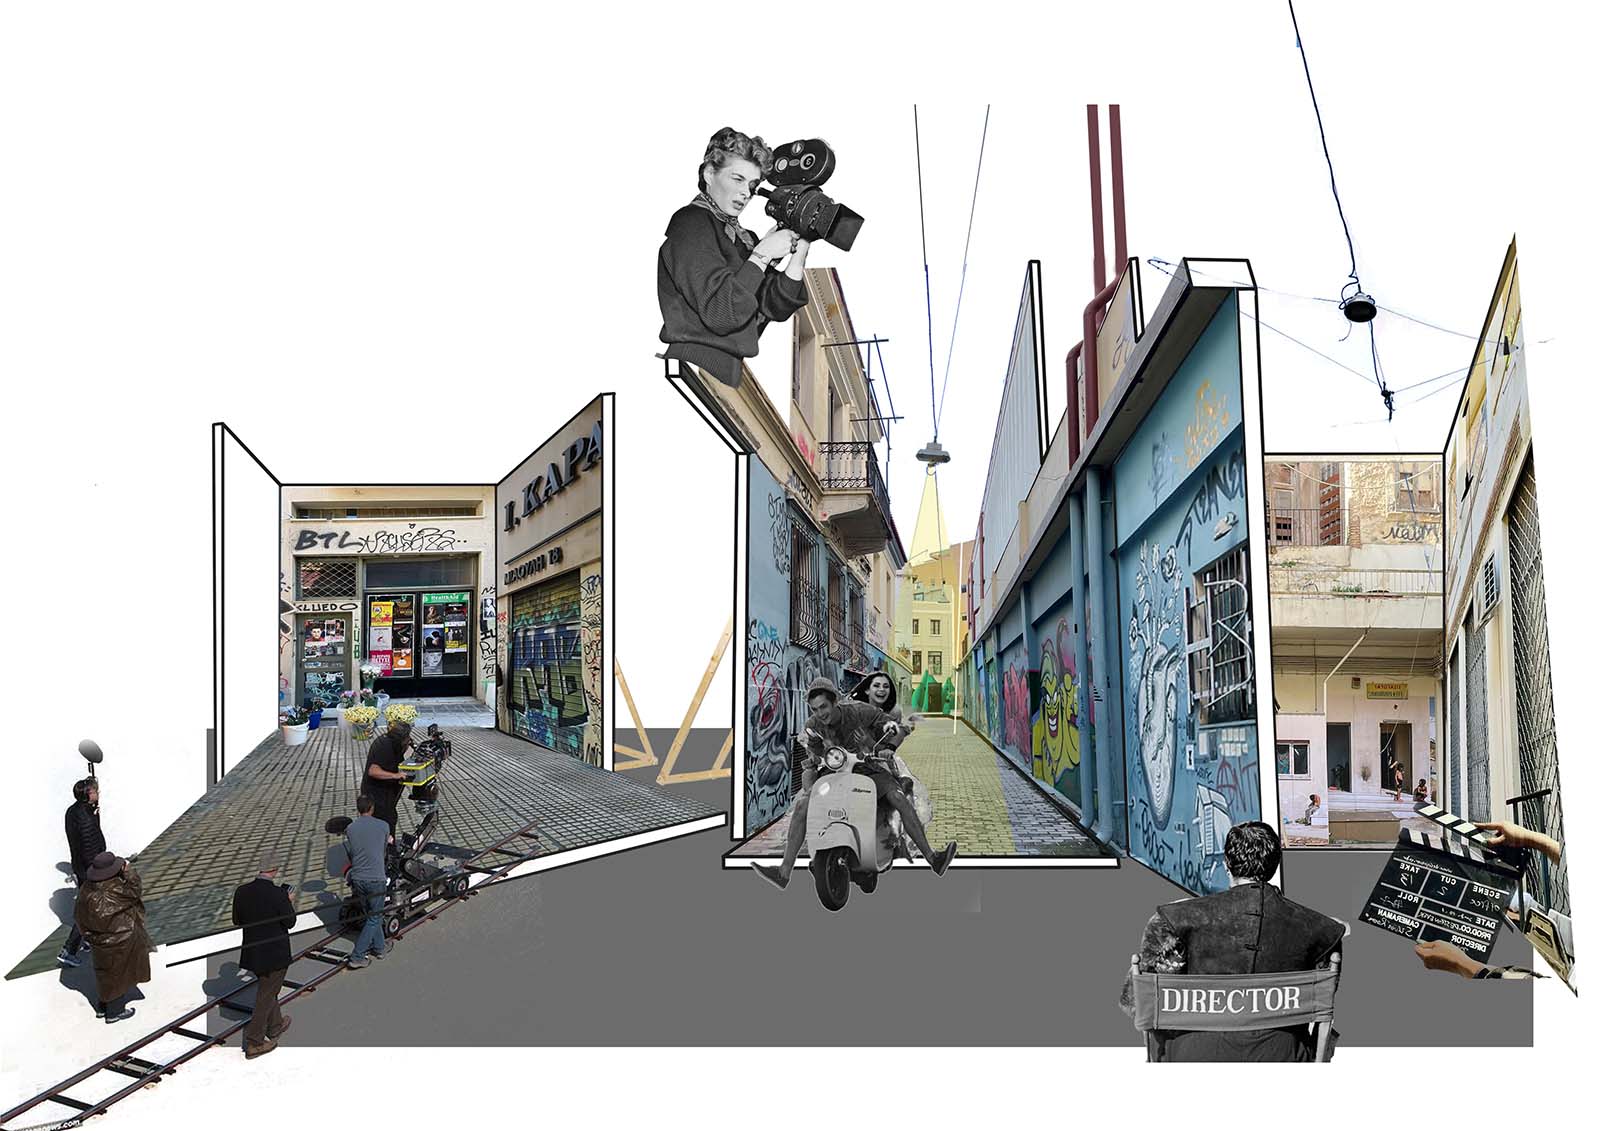 Archisearch Interactive walkthrough in Athens: Making scenes in the district of Psyrri | Diploma thesis project by Diamantopoulou Anastasia and Kousoropli Spyridoula